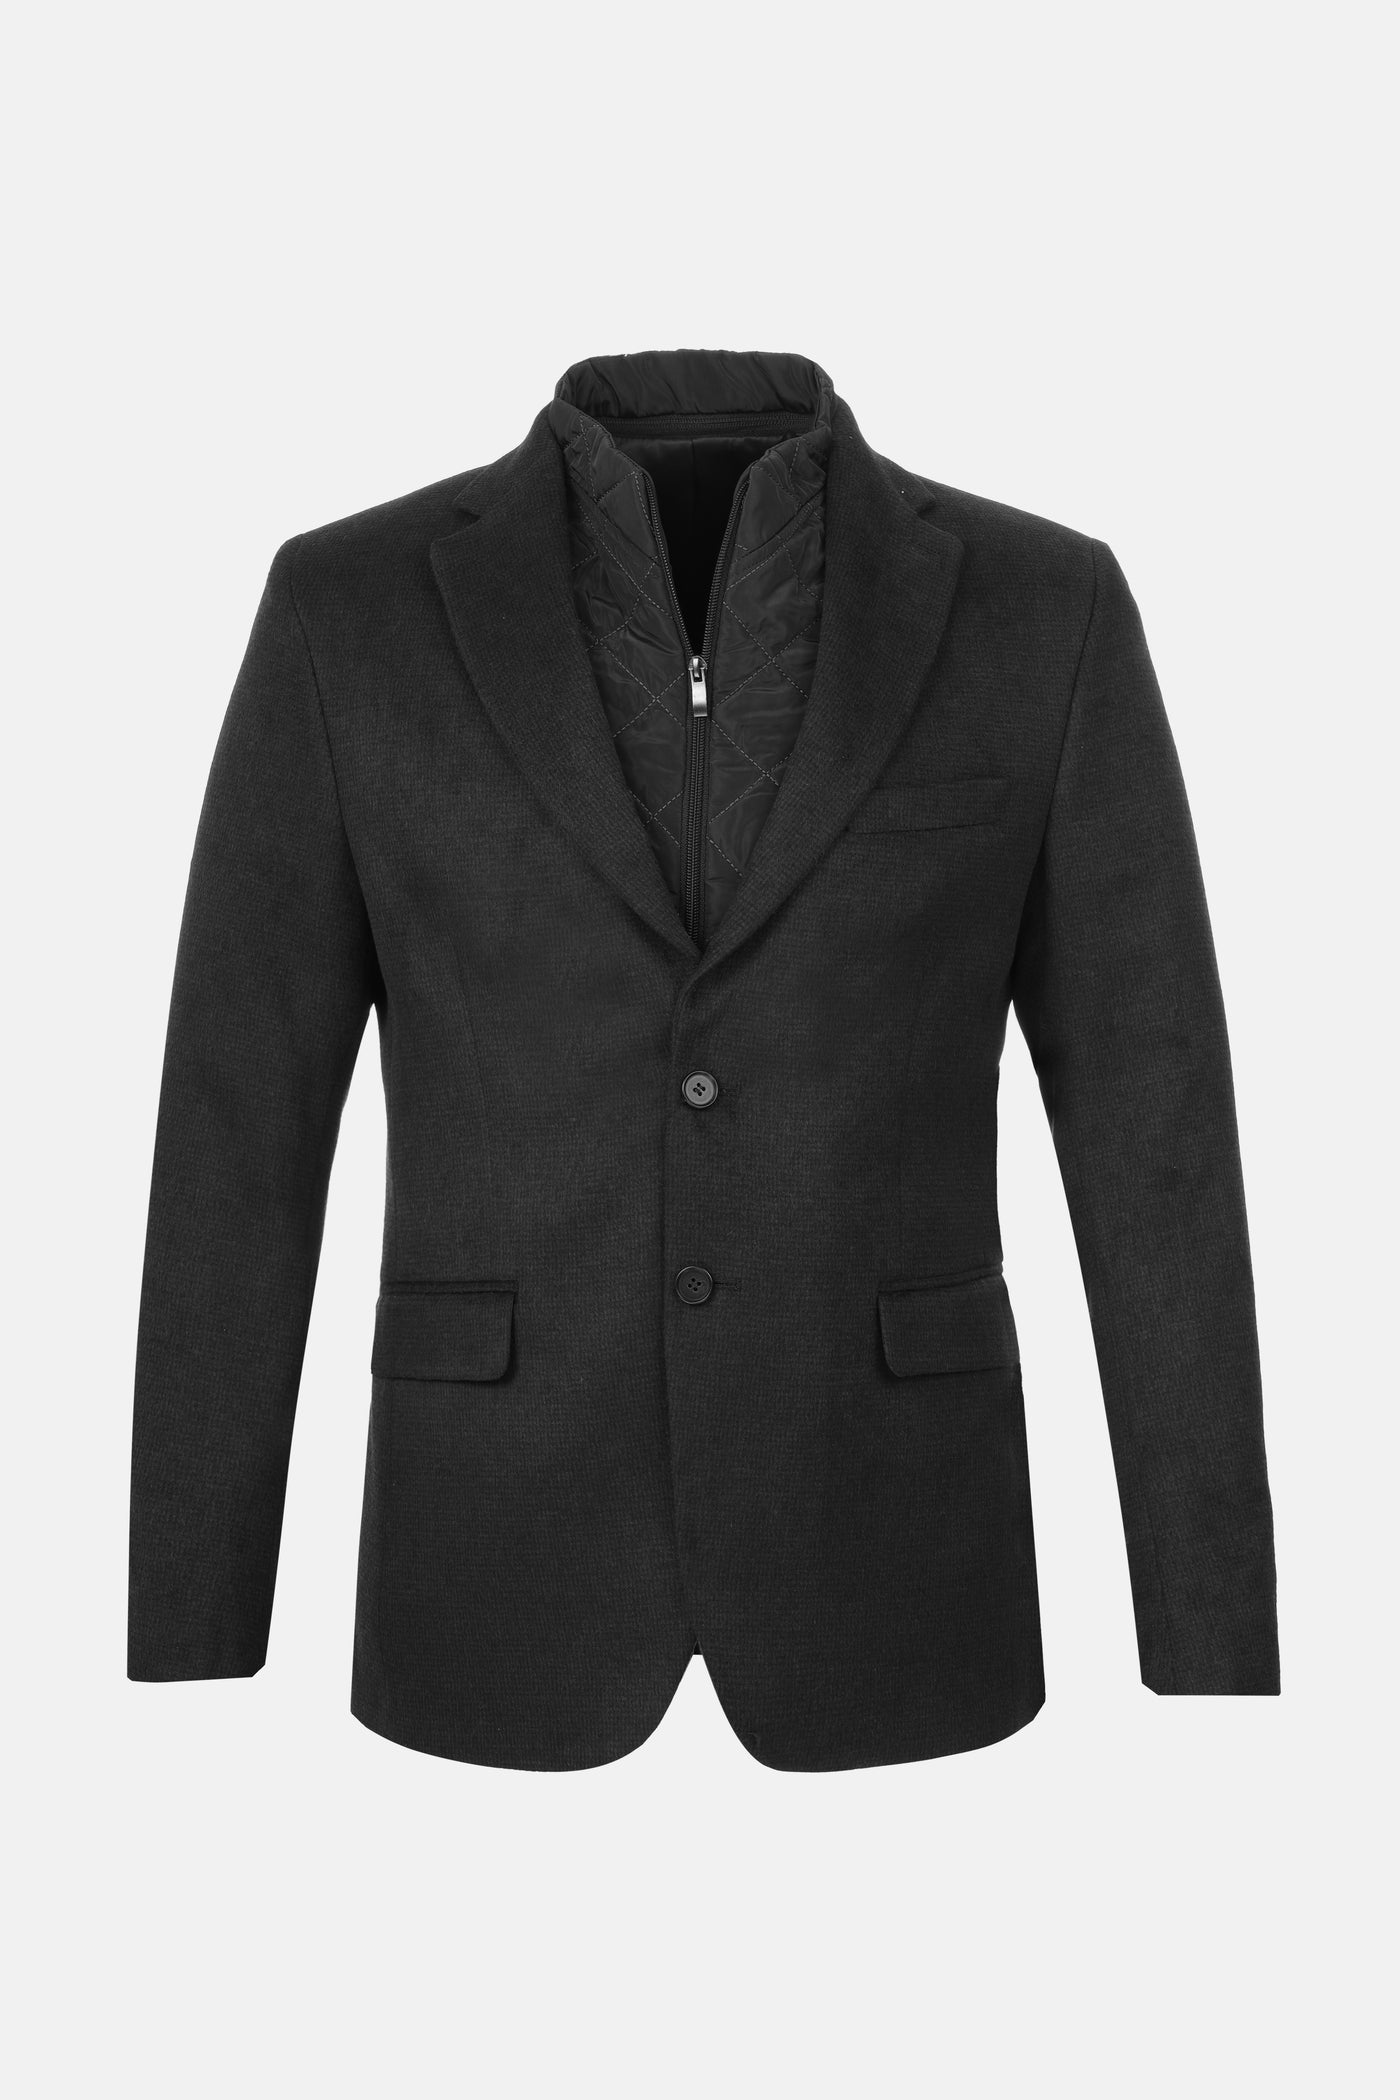 Woven Drak Gray & Black Blazer with removable padded piece